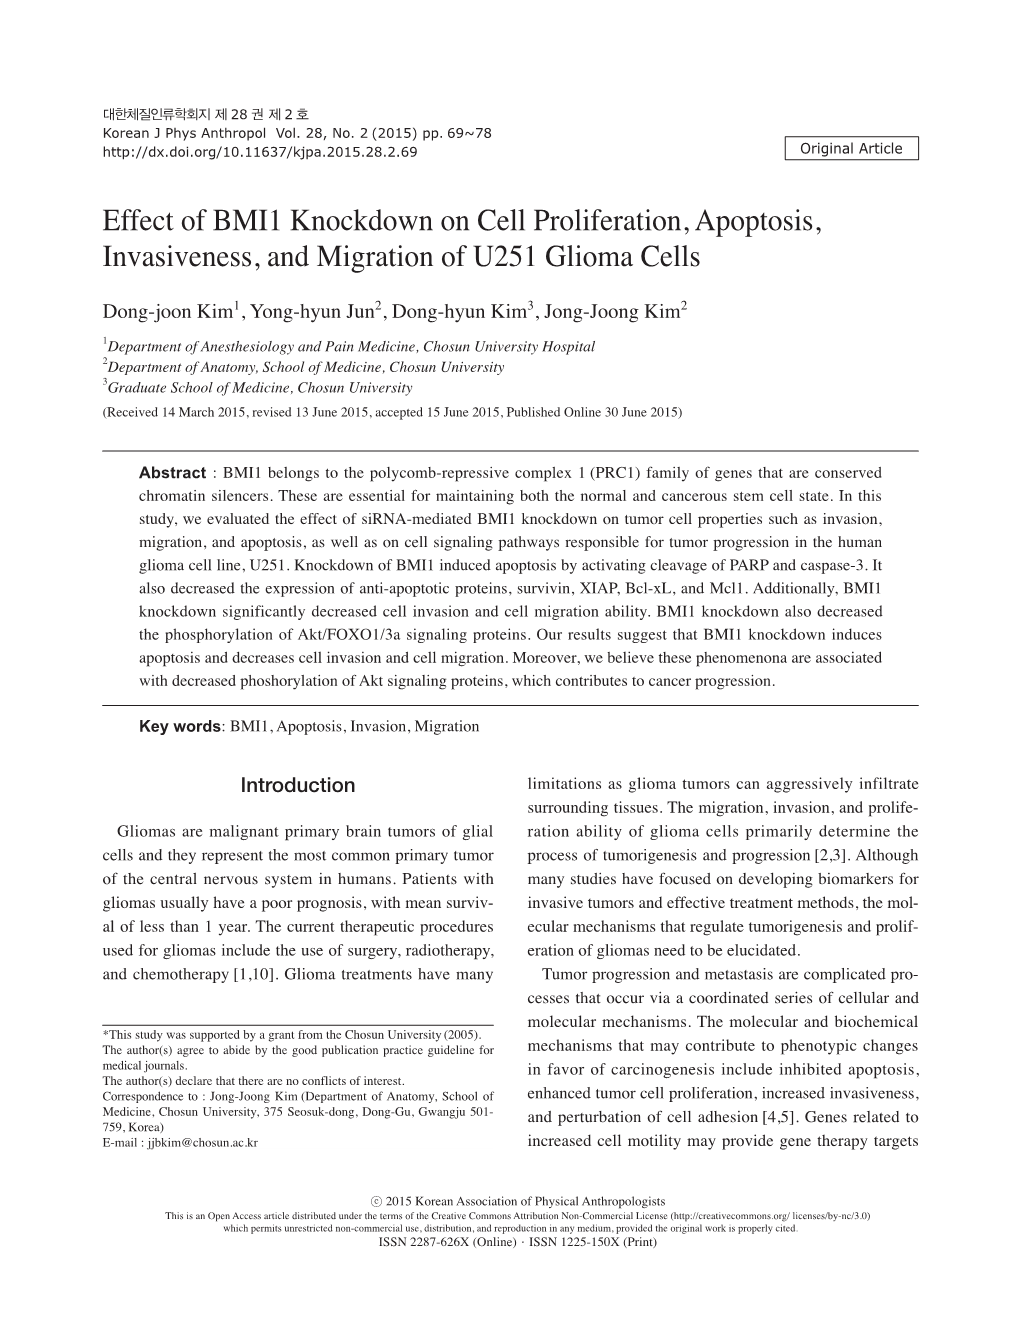 Effect of BMI1 Knockdown on Cell Proliferation, Apoptosis, Invasiveness, and Migration of U251 Glioma Cells